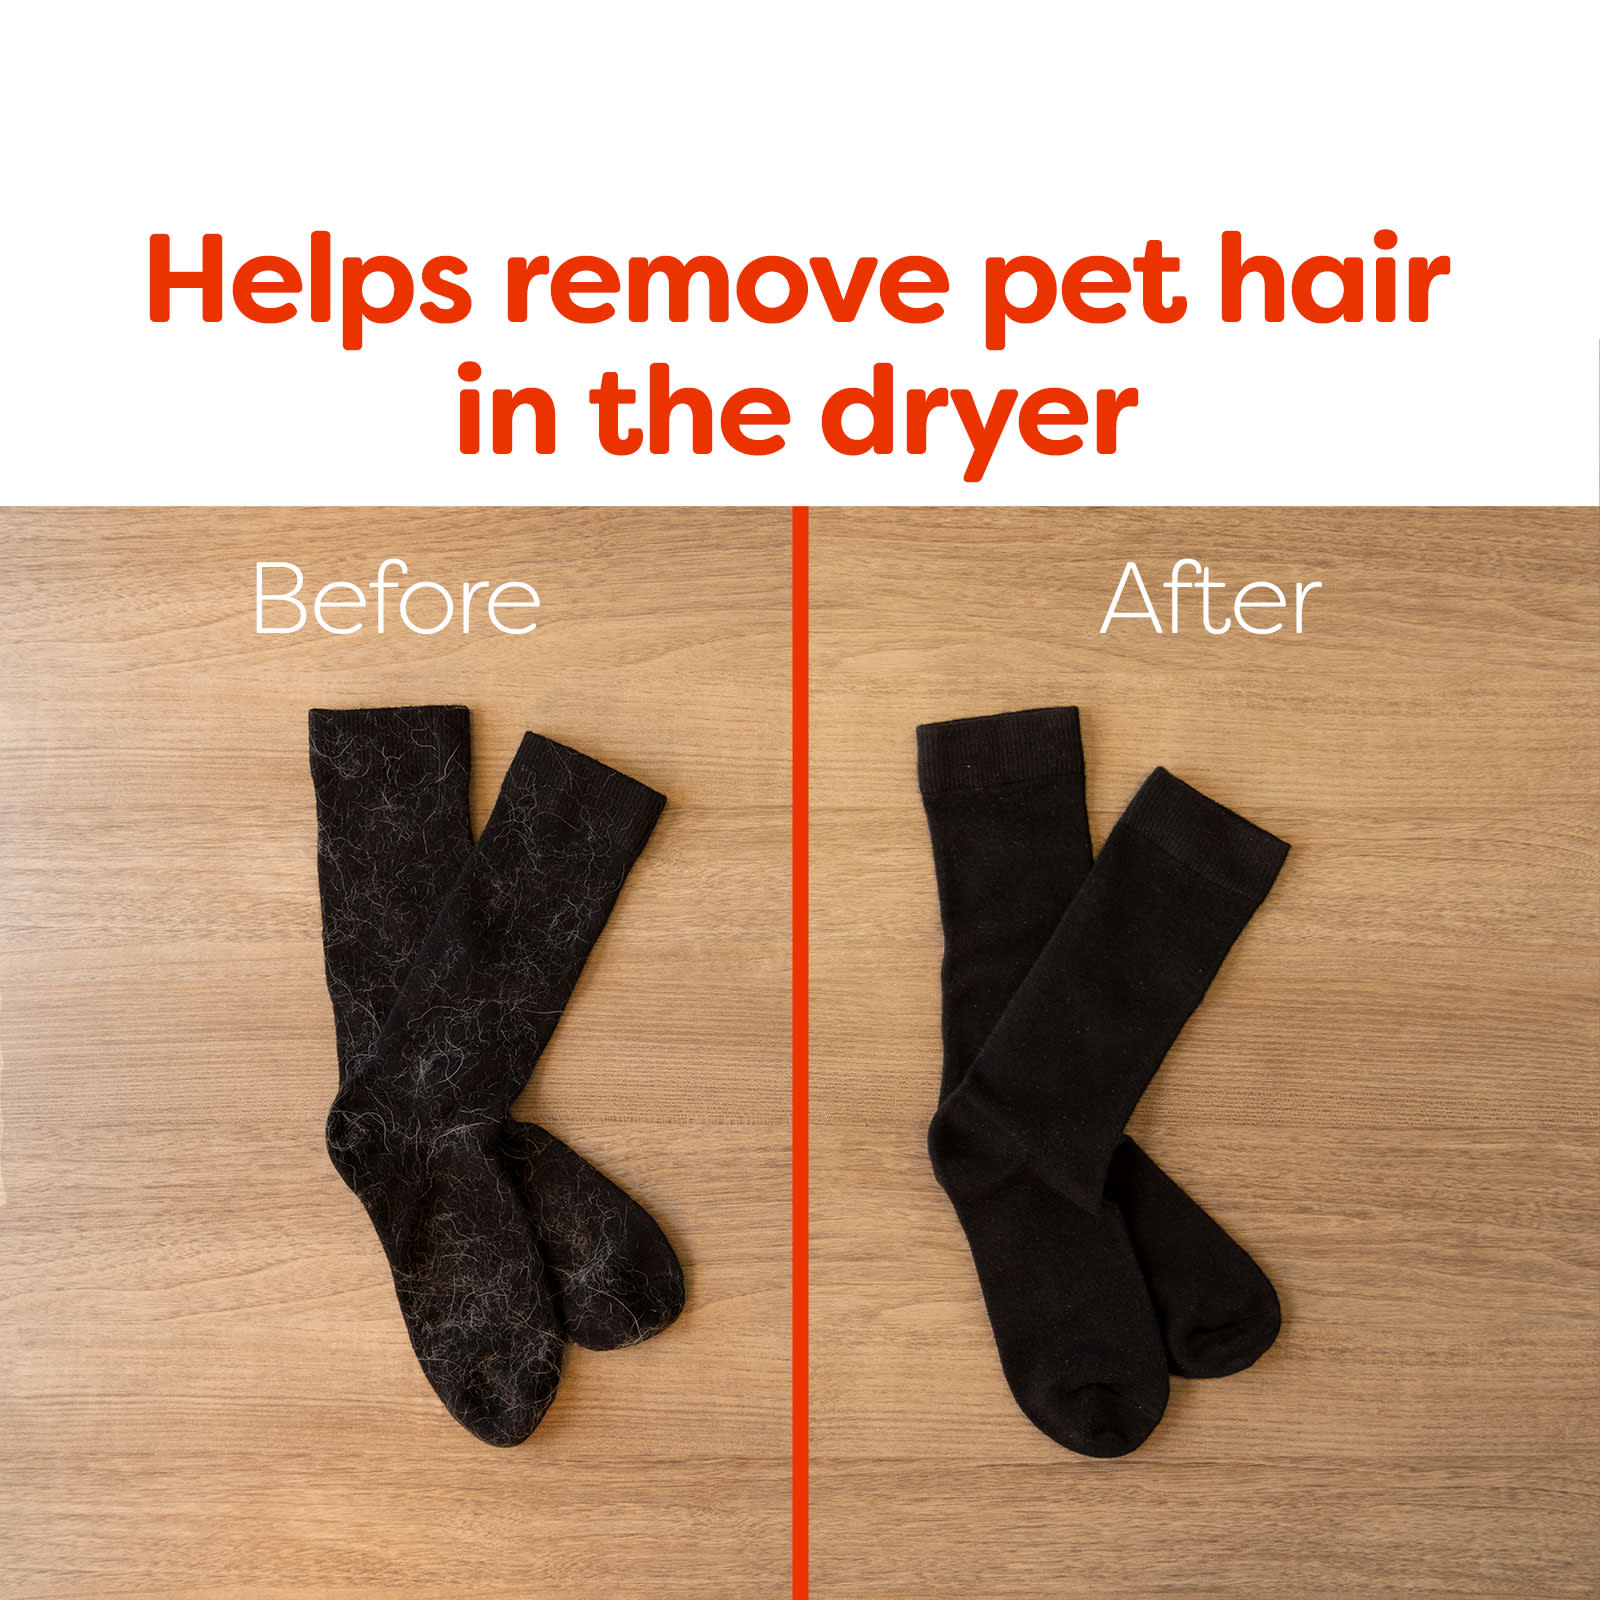 Miracle Brand - Sick of pet hair sticking to your sheets?⁠ Try